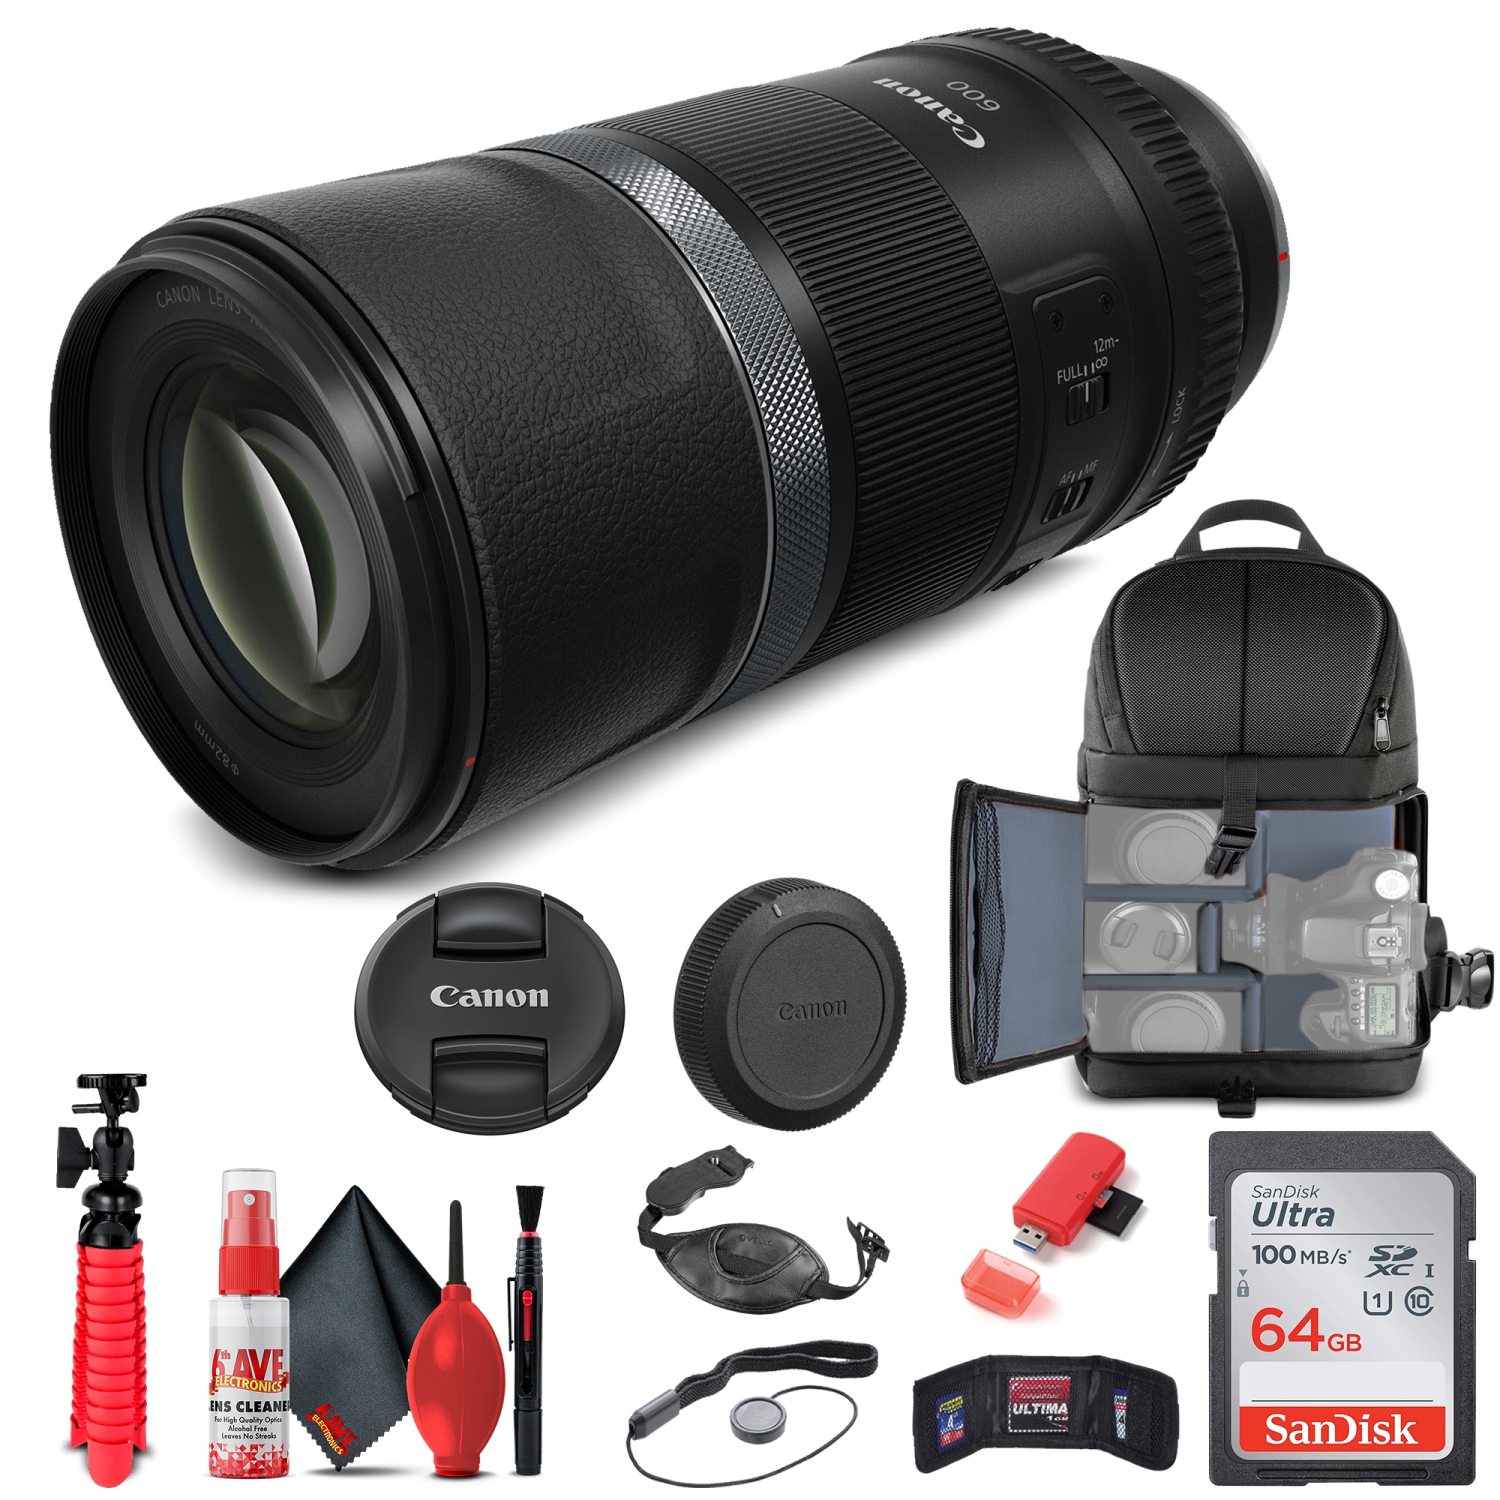 Canon RF 600mm f/11 IS STM Super-Telephoto Lens 3986C002 + Filter + BackPack + 64GB Card + More